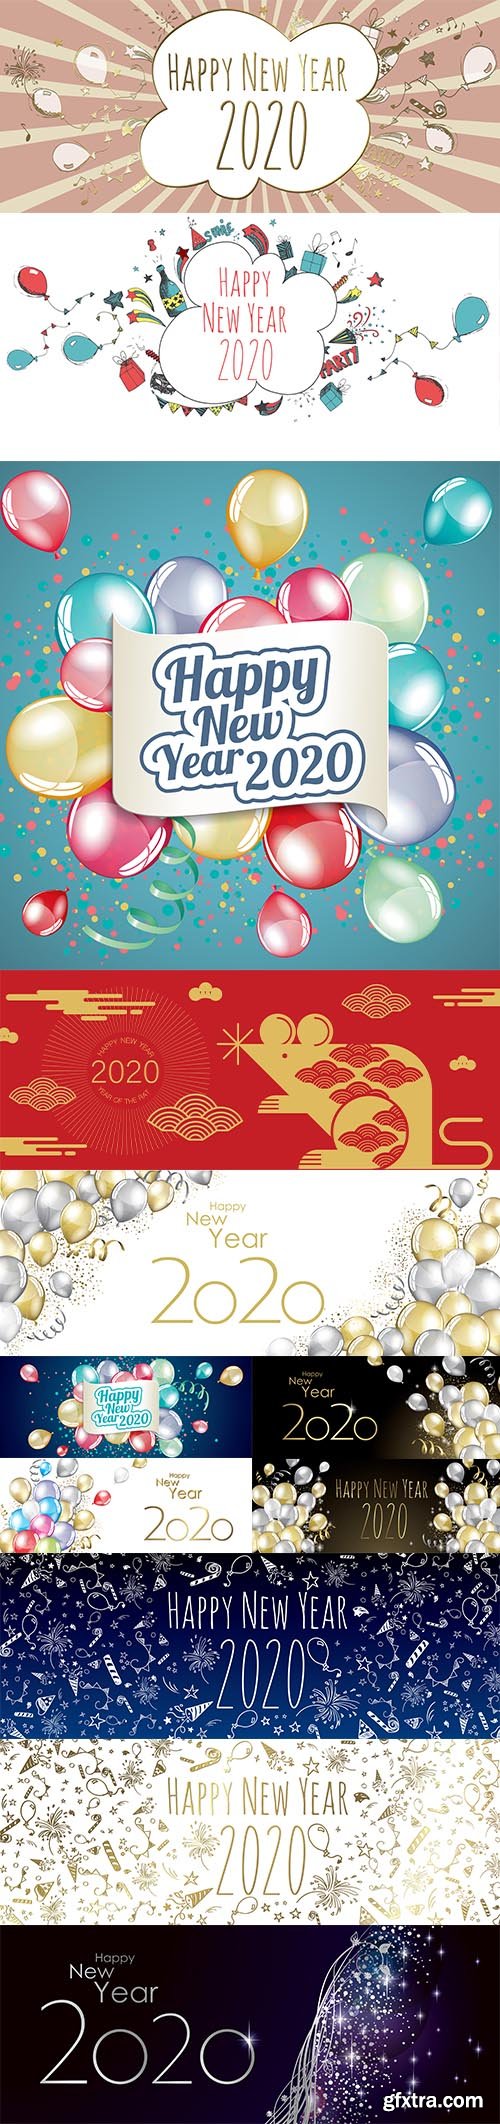 Merry Christmas and Happy New Year 2020 Illustrations Set 3